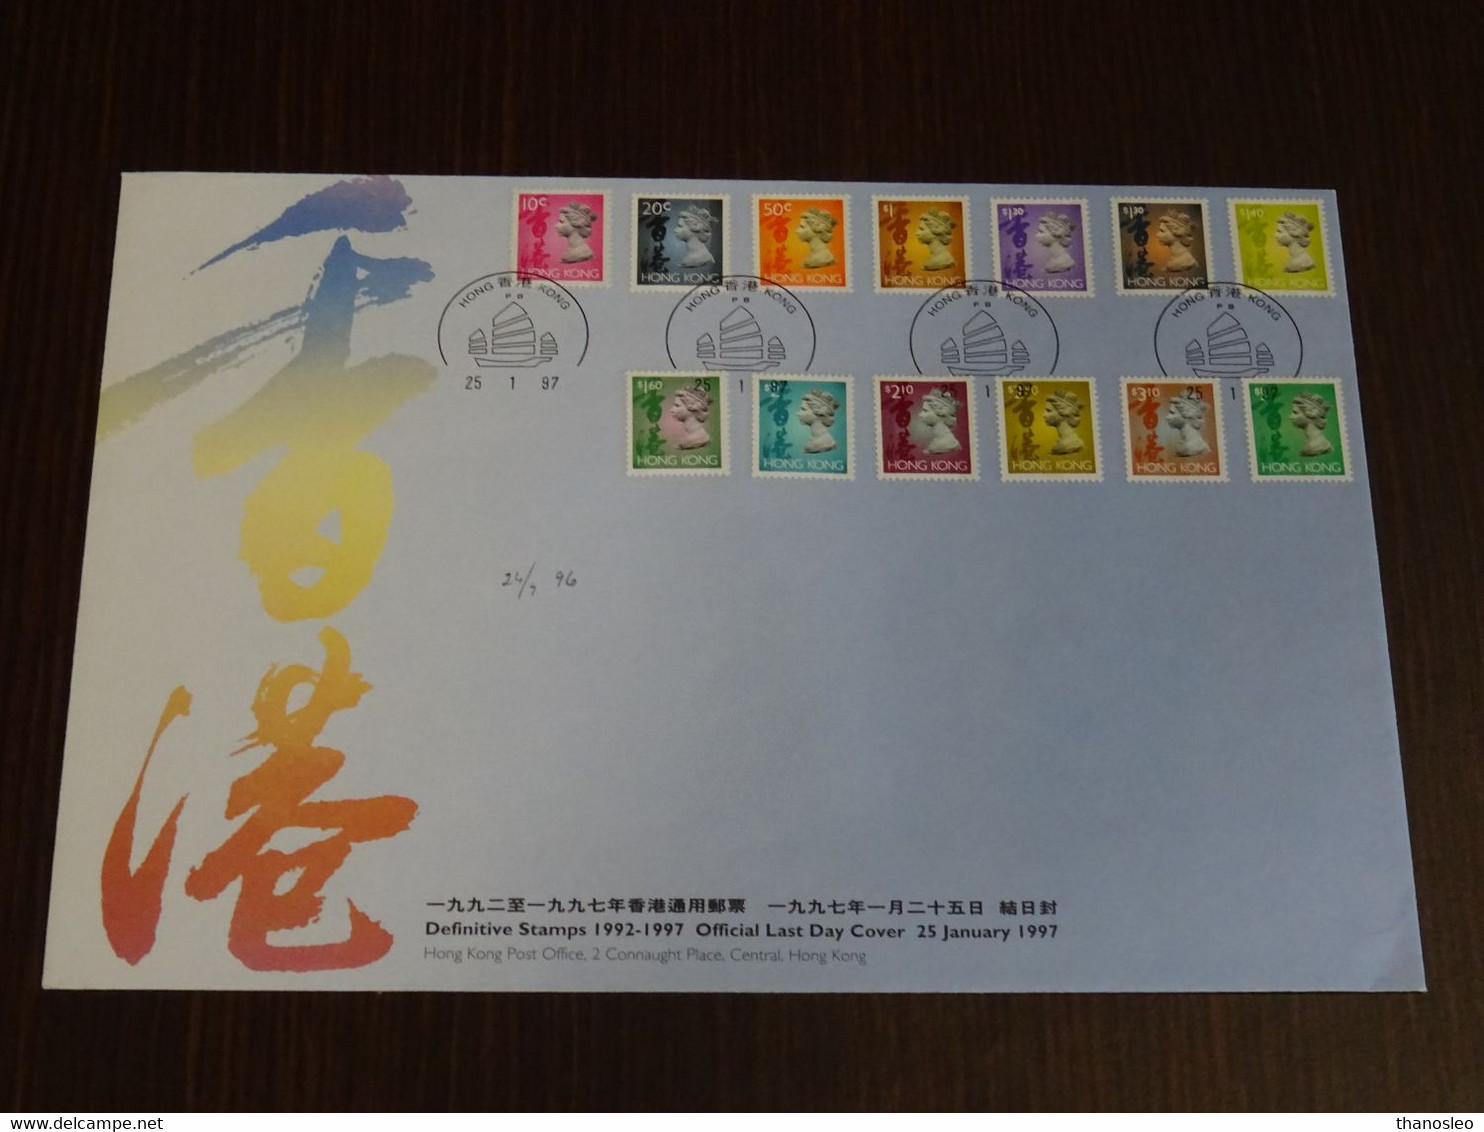 Hong Kong 1997 Definitive Stamps 1992-1997 FDC VF - FDC